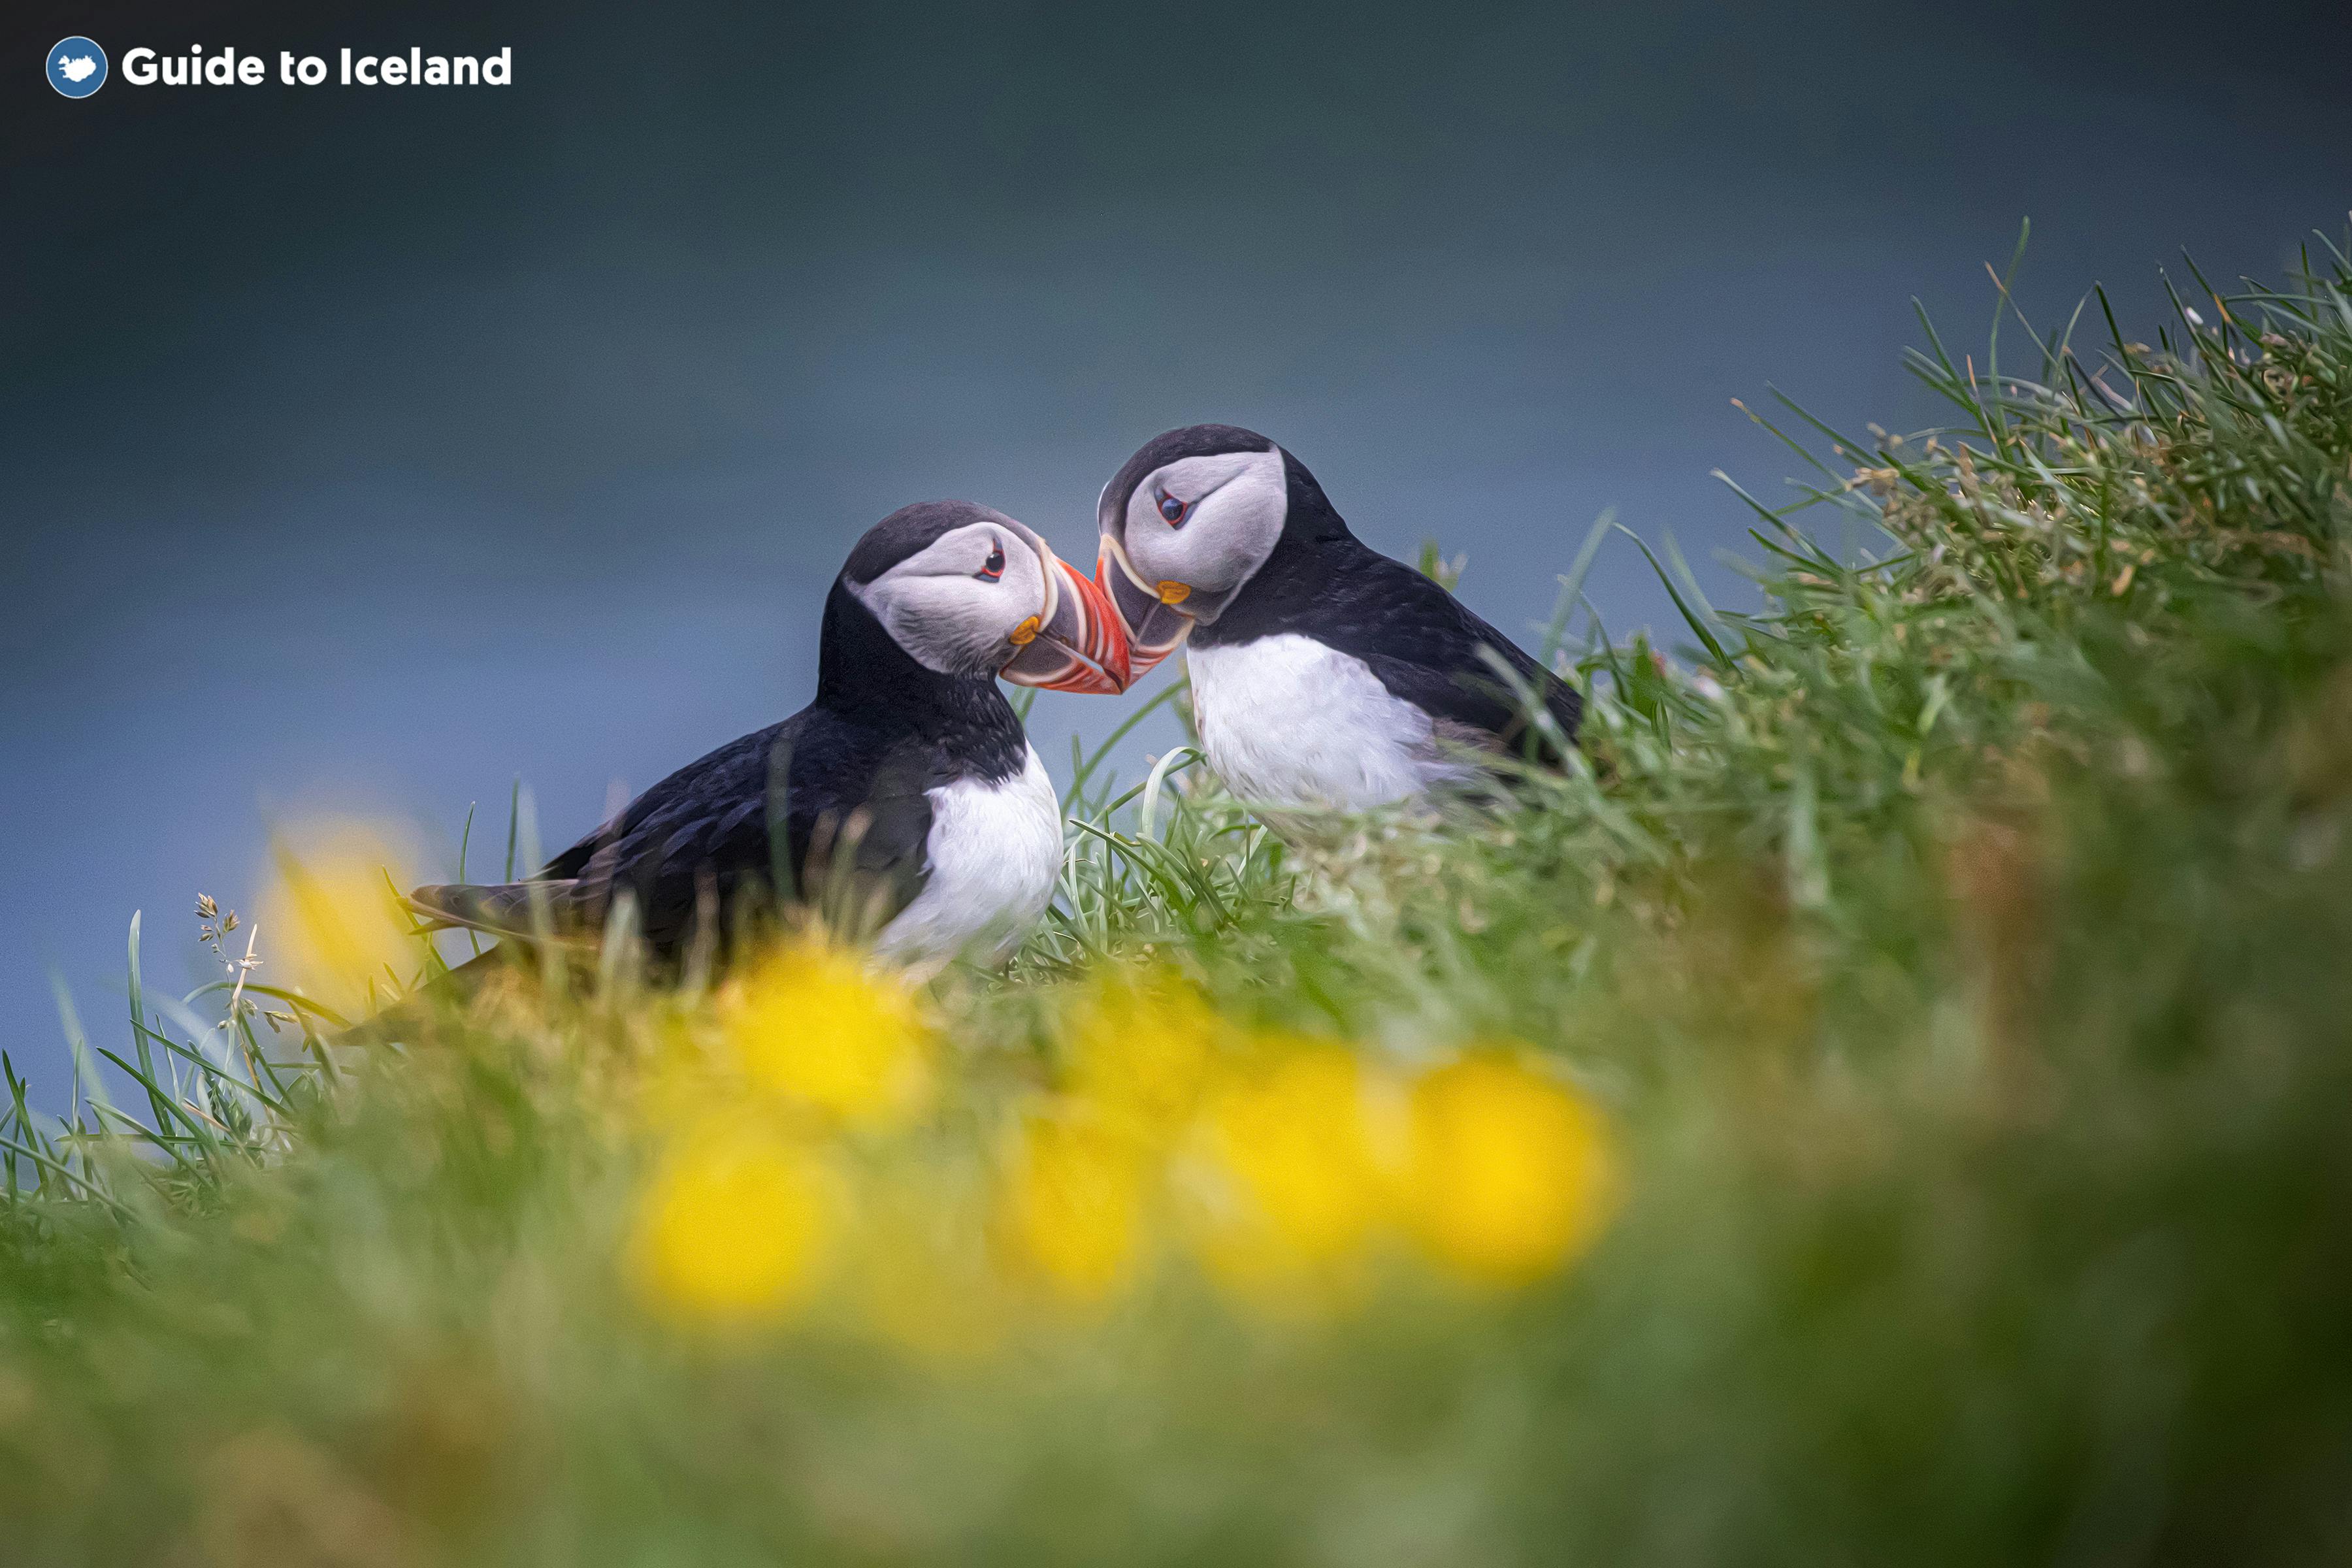 The puffin colony in the Westman Islands is the largest in the world.